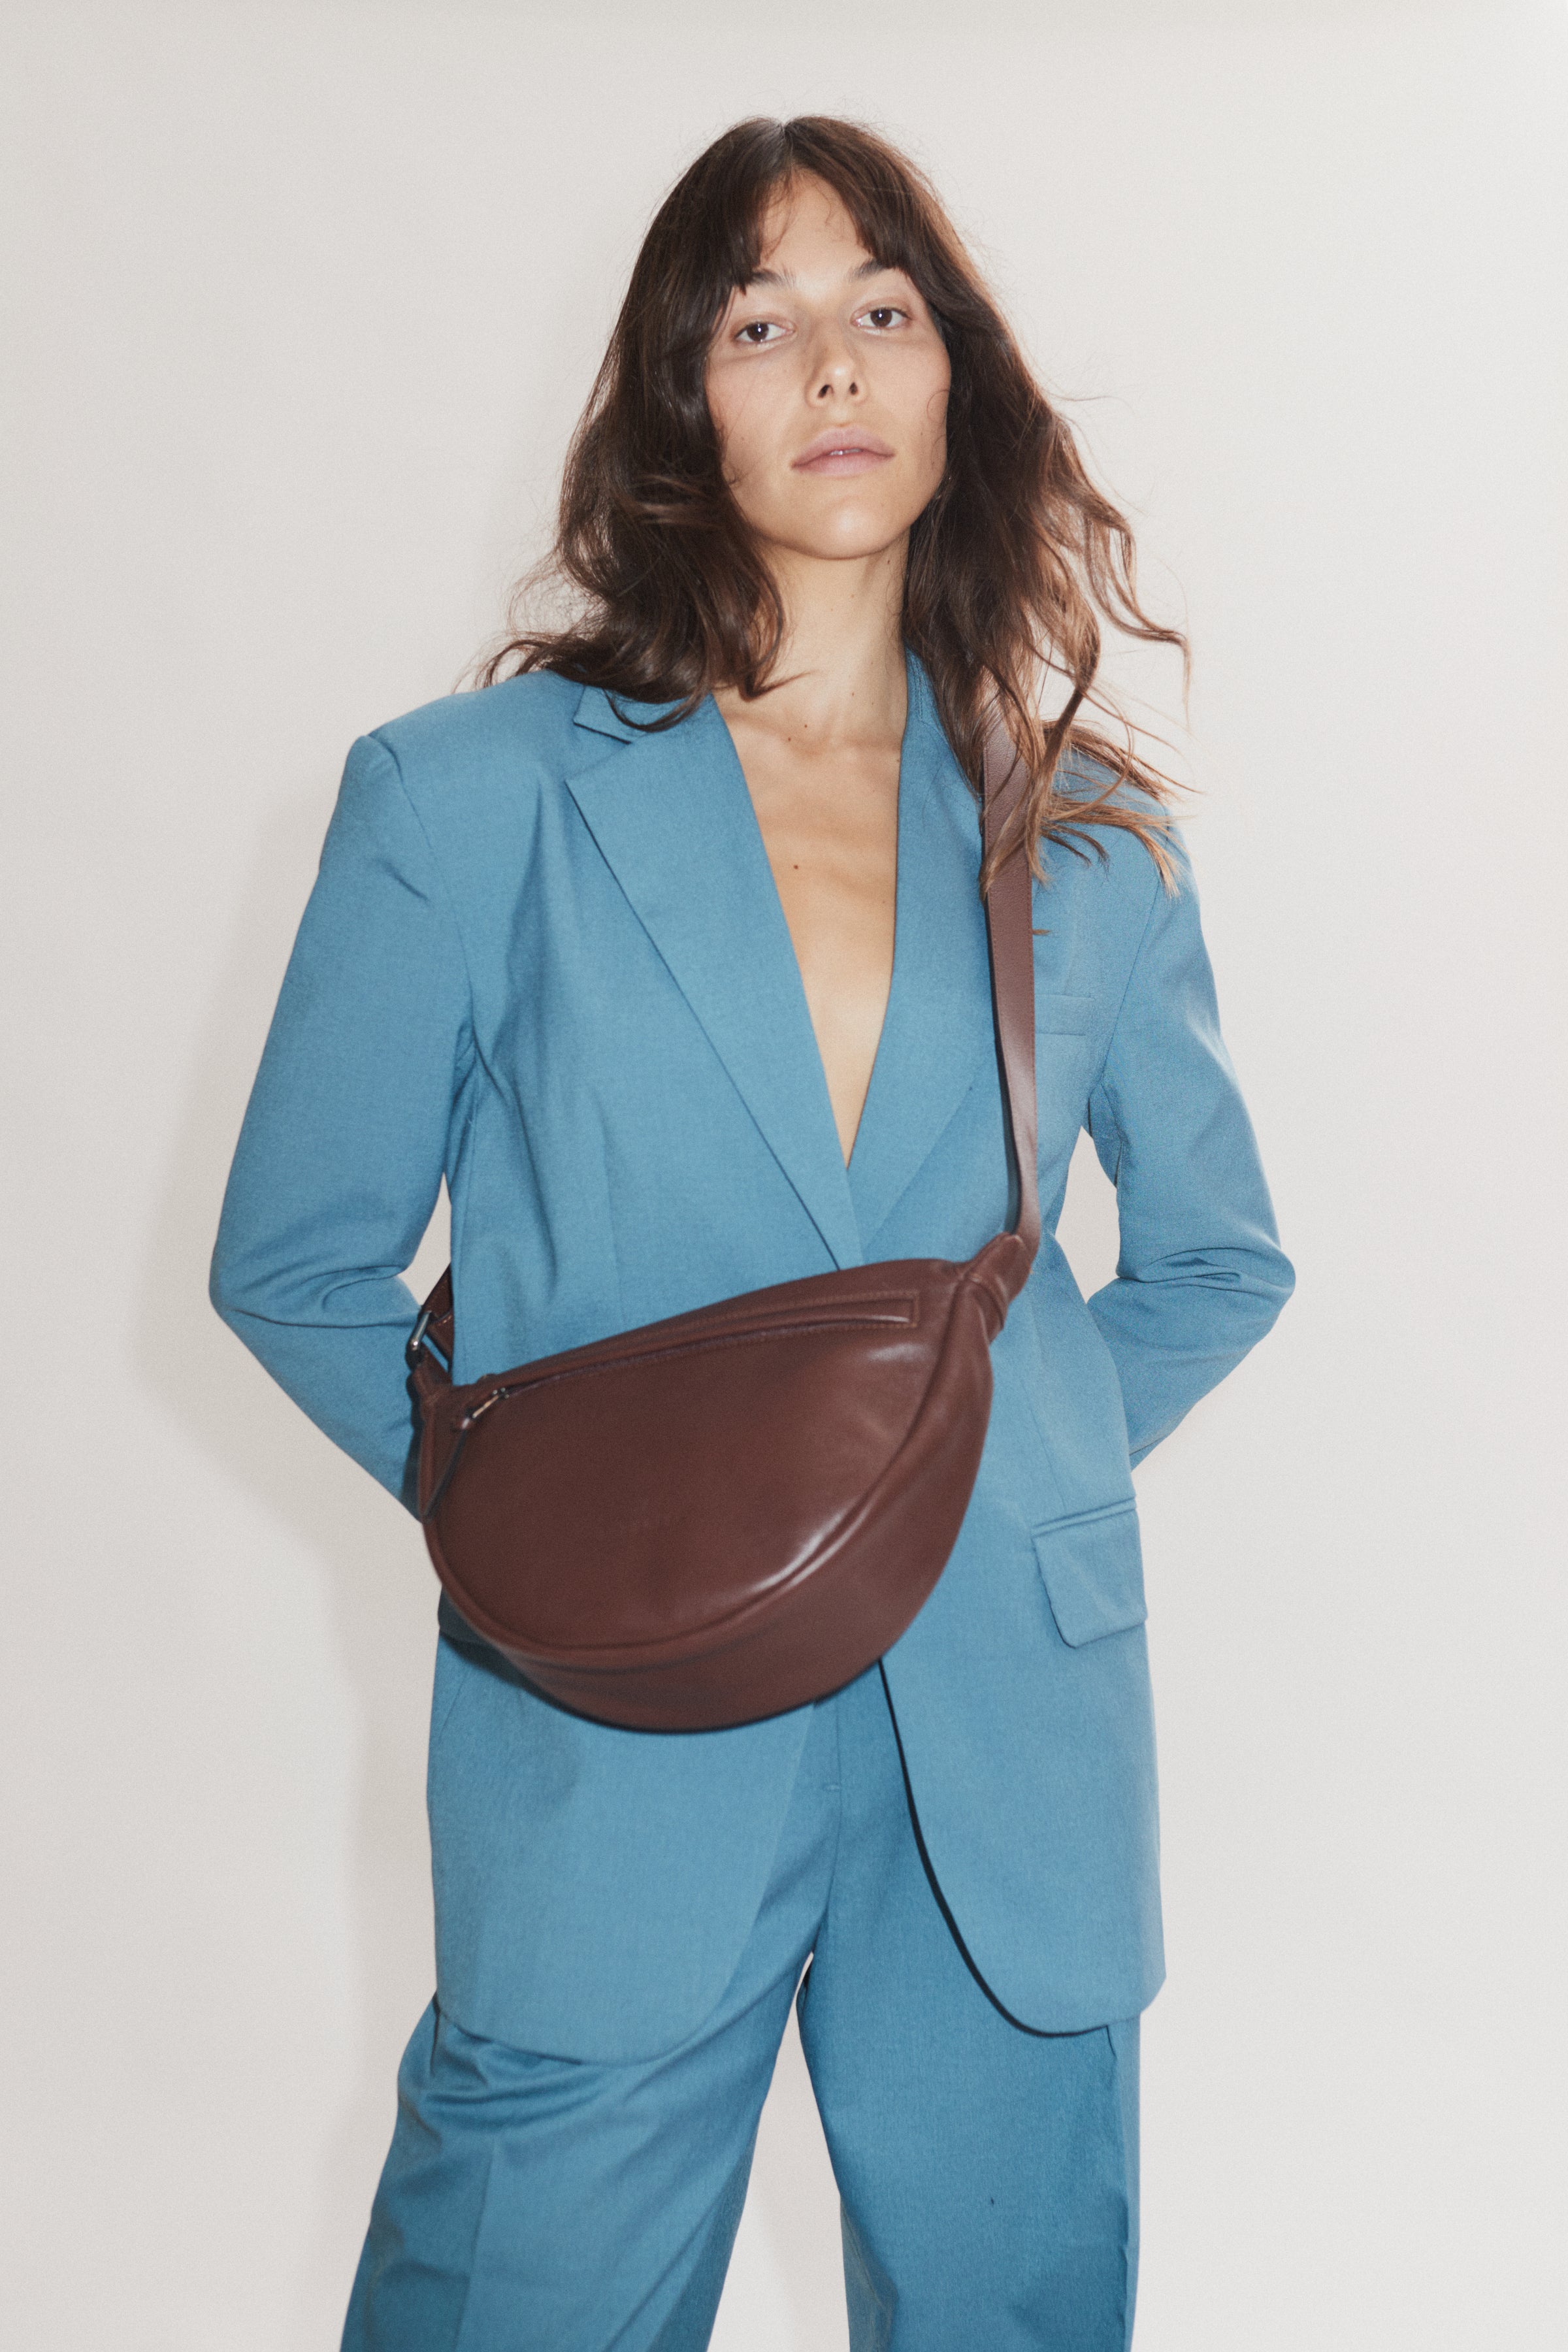 The Leather Sporty Crossbody: Coffee